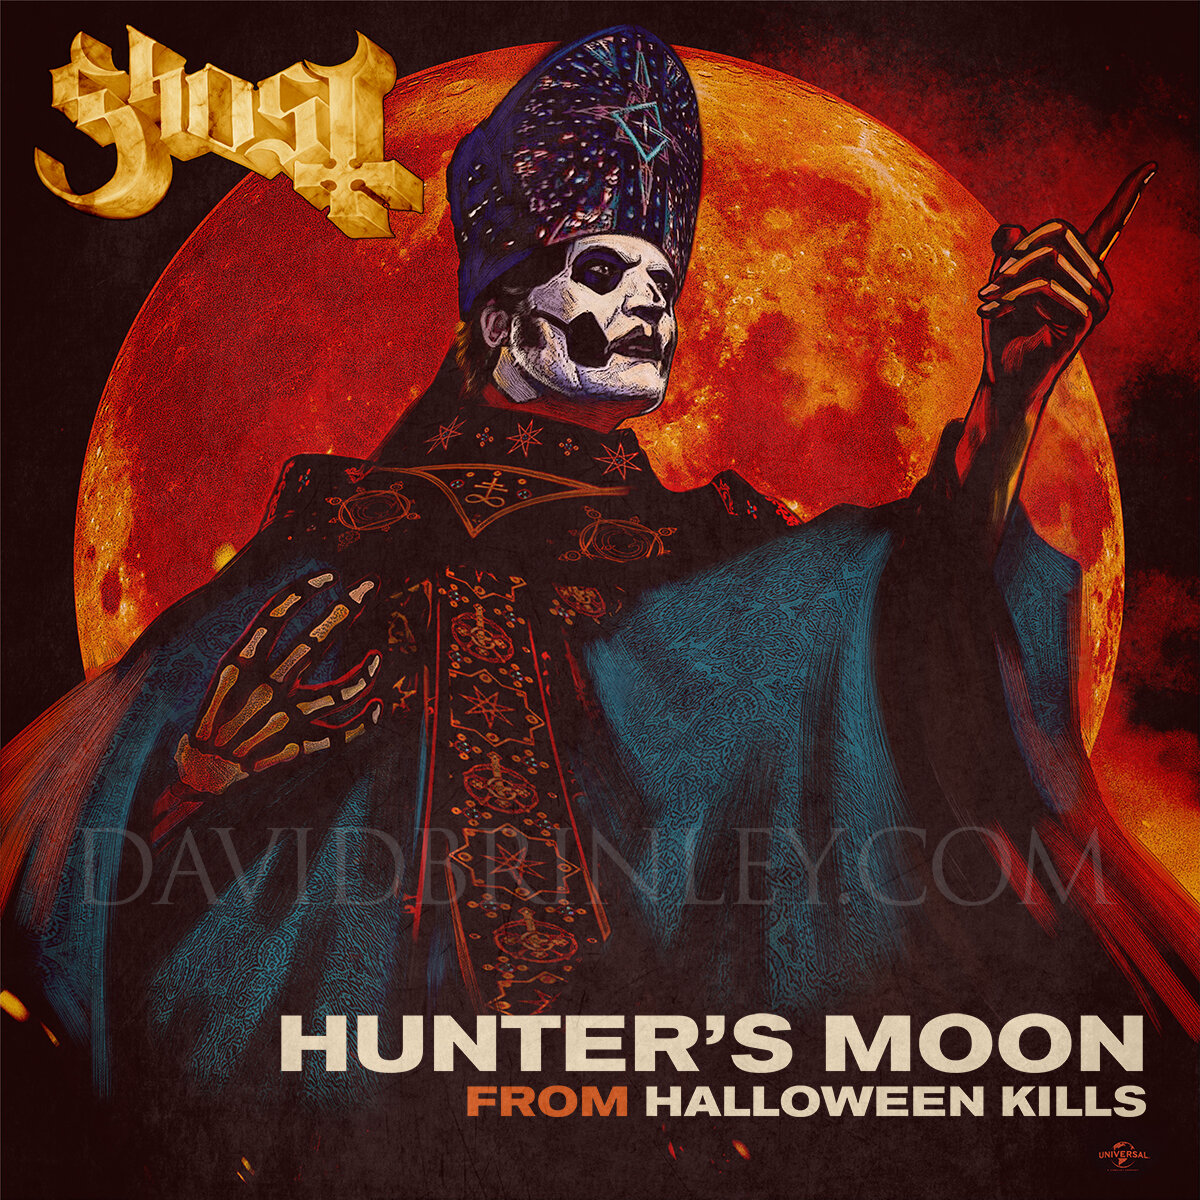   GHOST |  Hunter’s Moon   |  vinyl 7” single cover |  from the  Halloween Kills  movie soundtrack   Acrylic and digital 